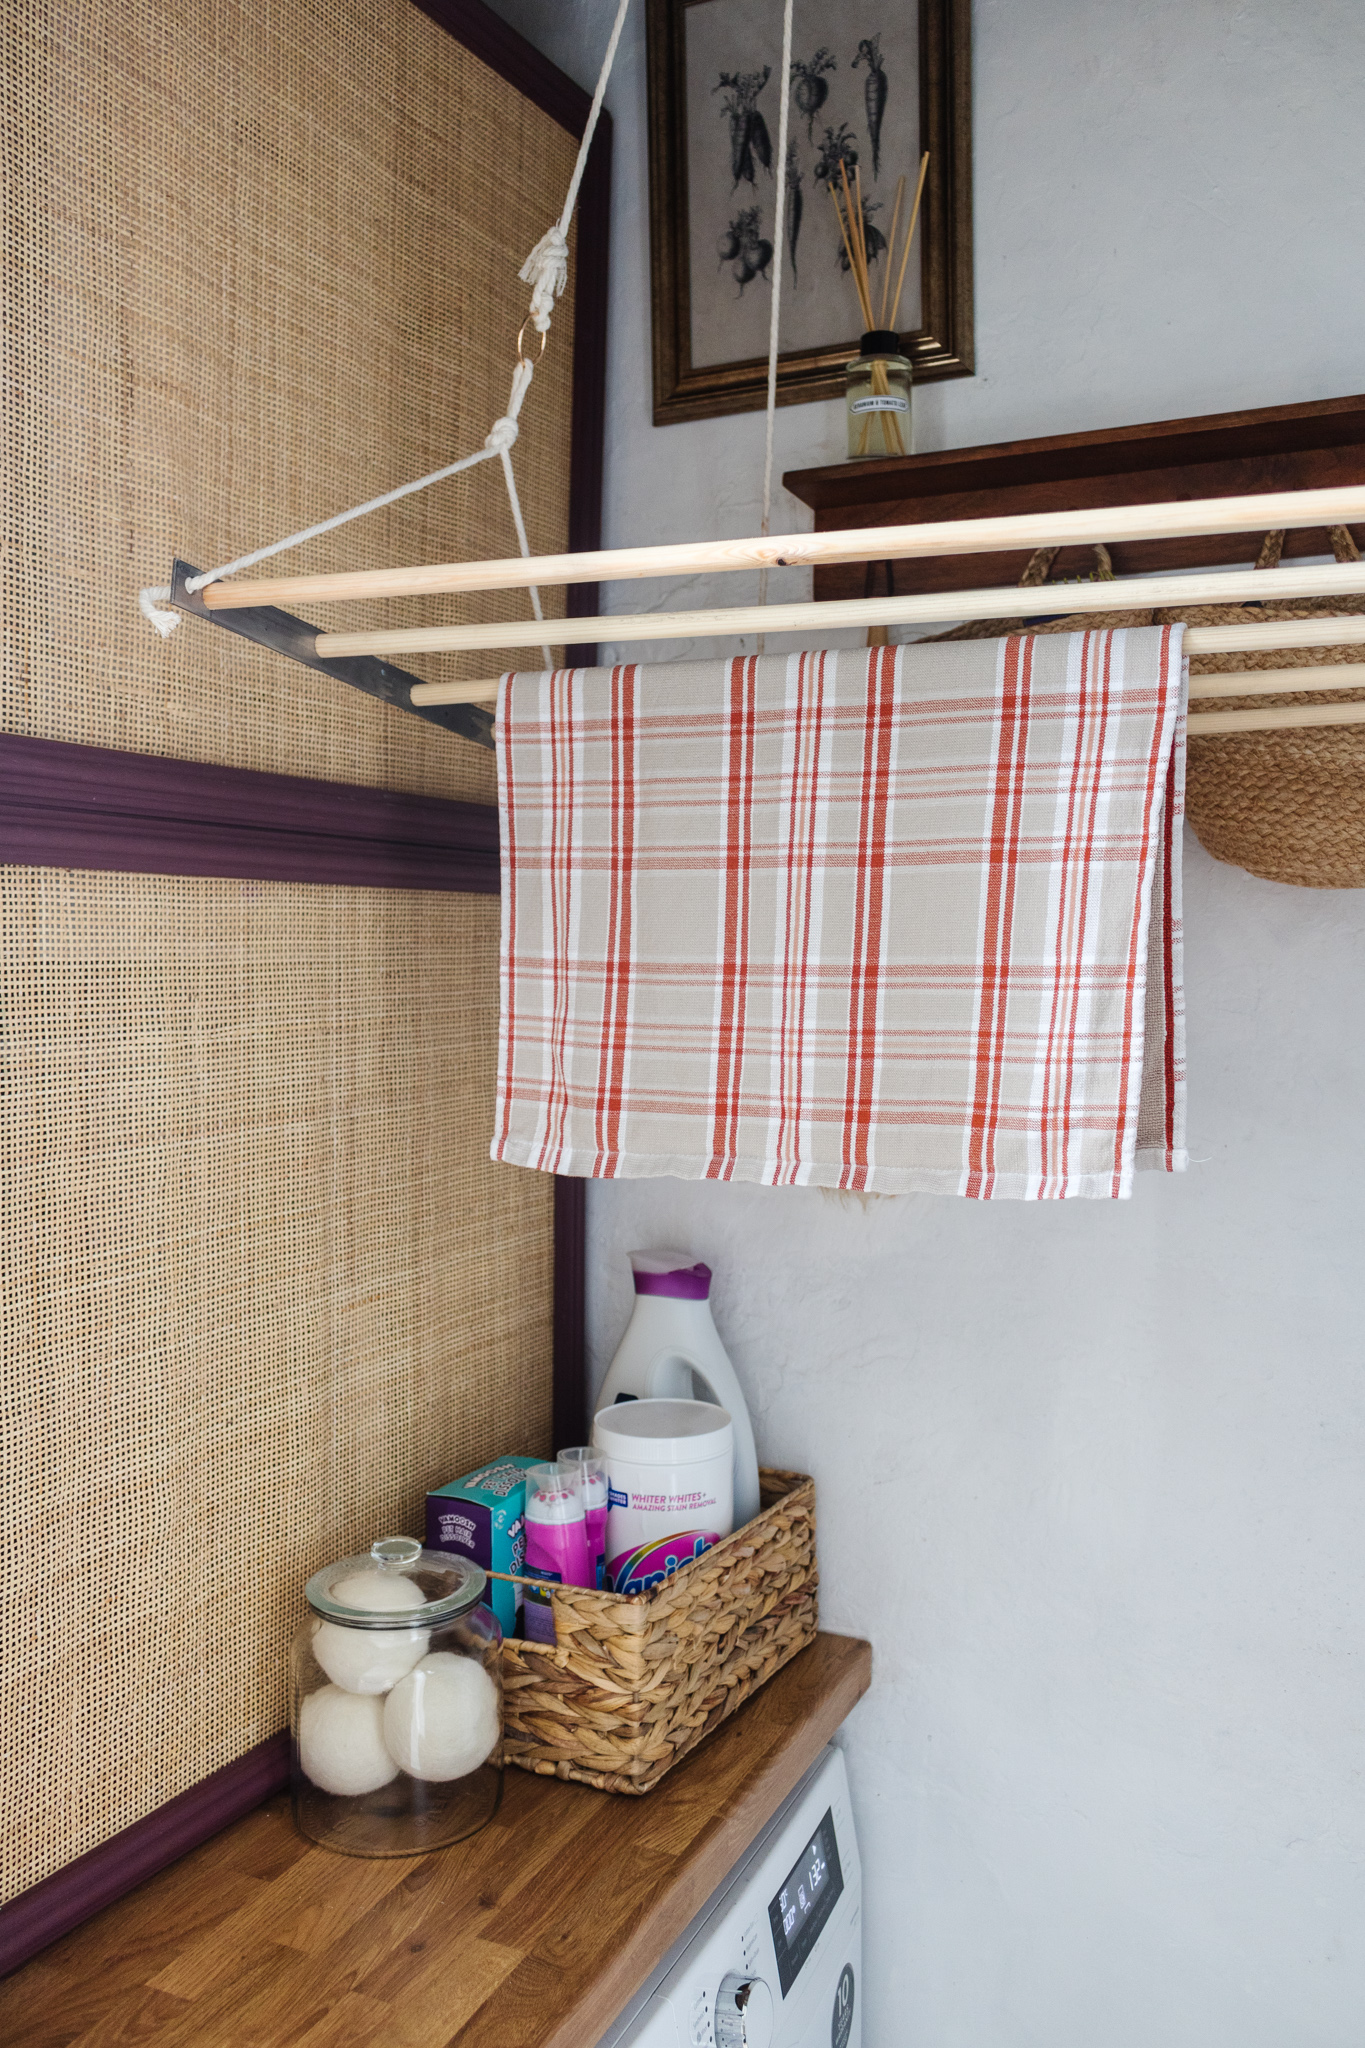 How to build a DIY laundry drying rack